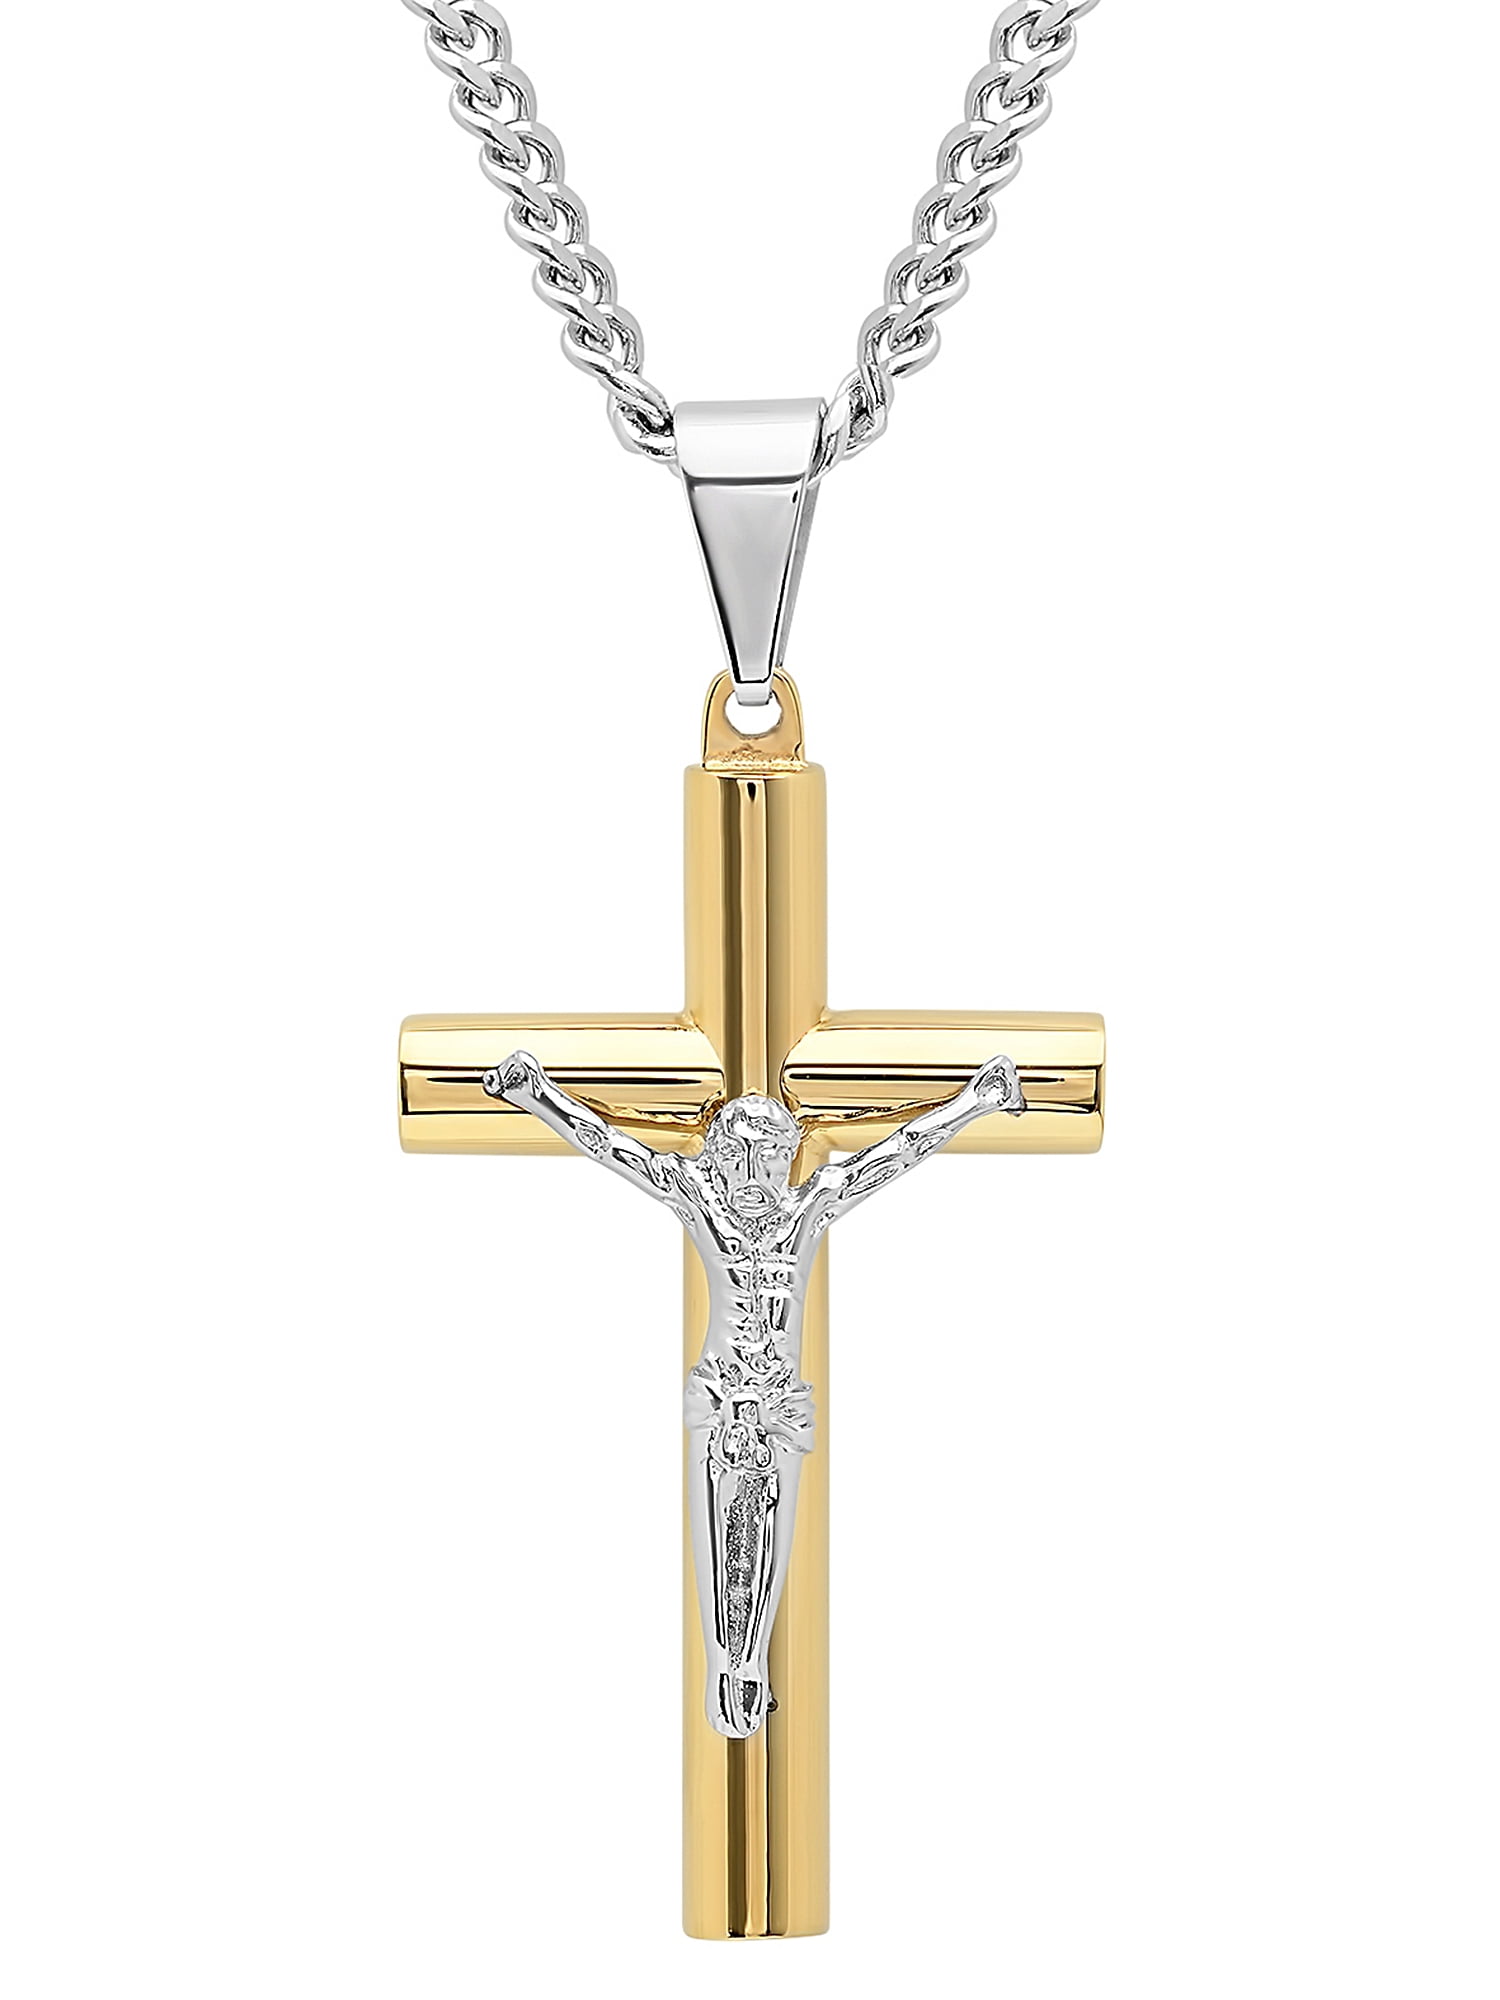 Noble Mens Cross Pendant Necklace in Rosewood and Stainless Steel Crucifix Male 